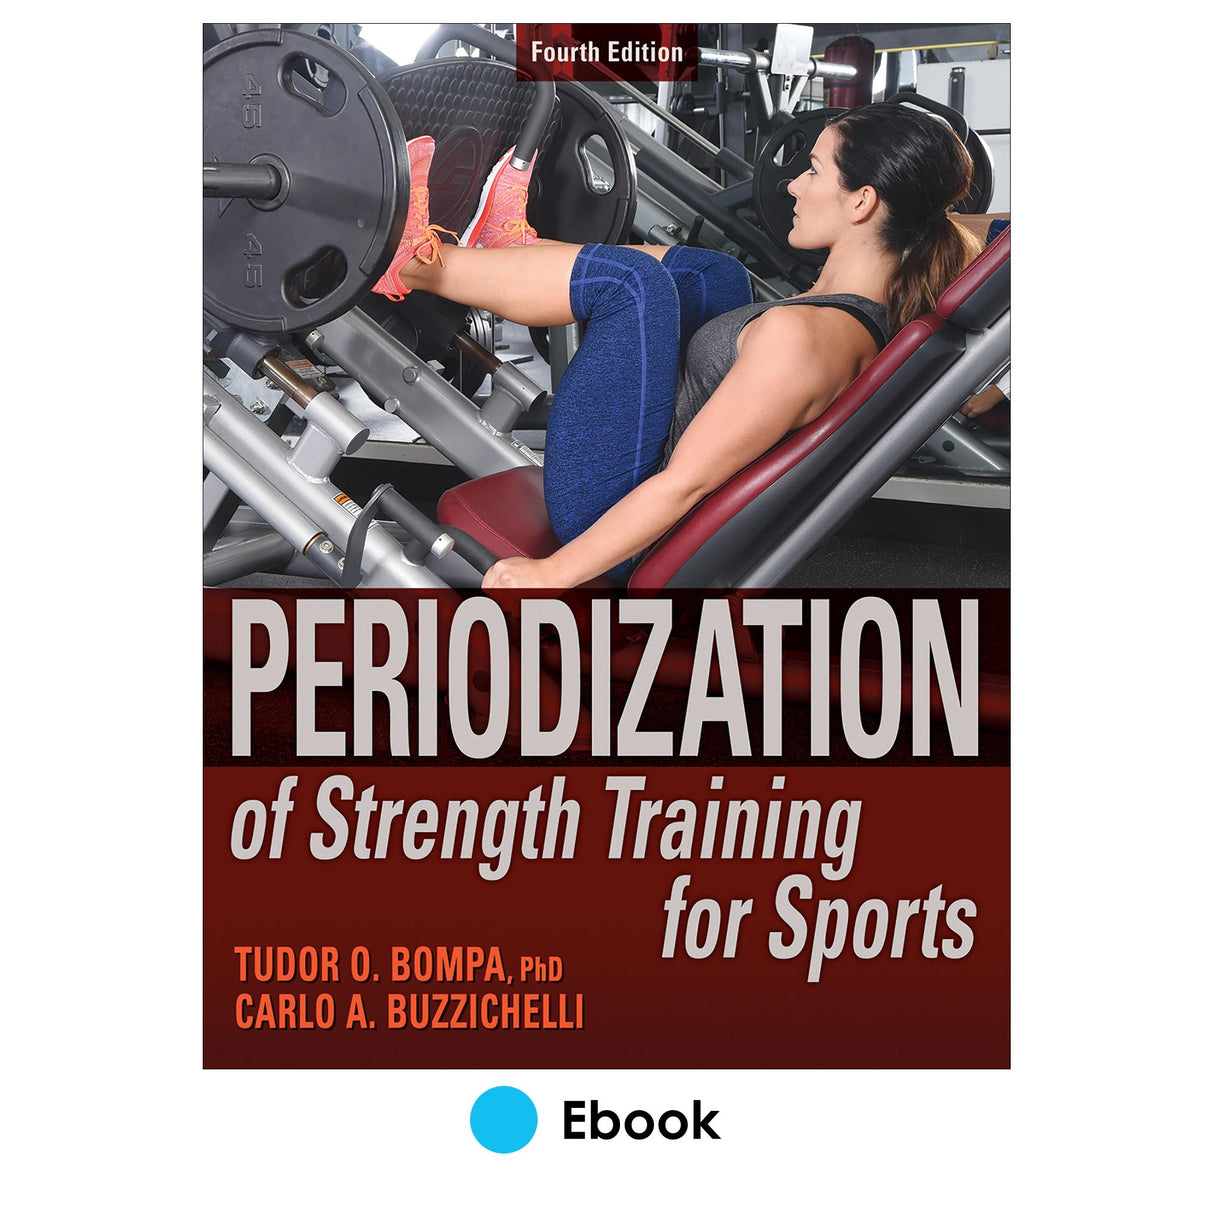 Periodization of Strength Training for Sports 4th Edition epub